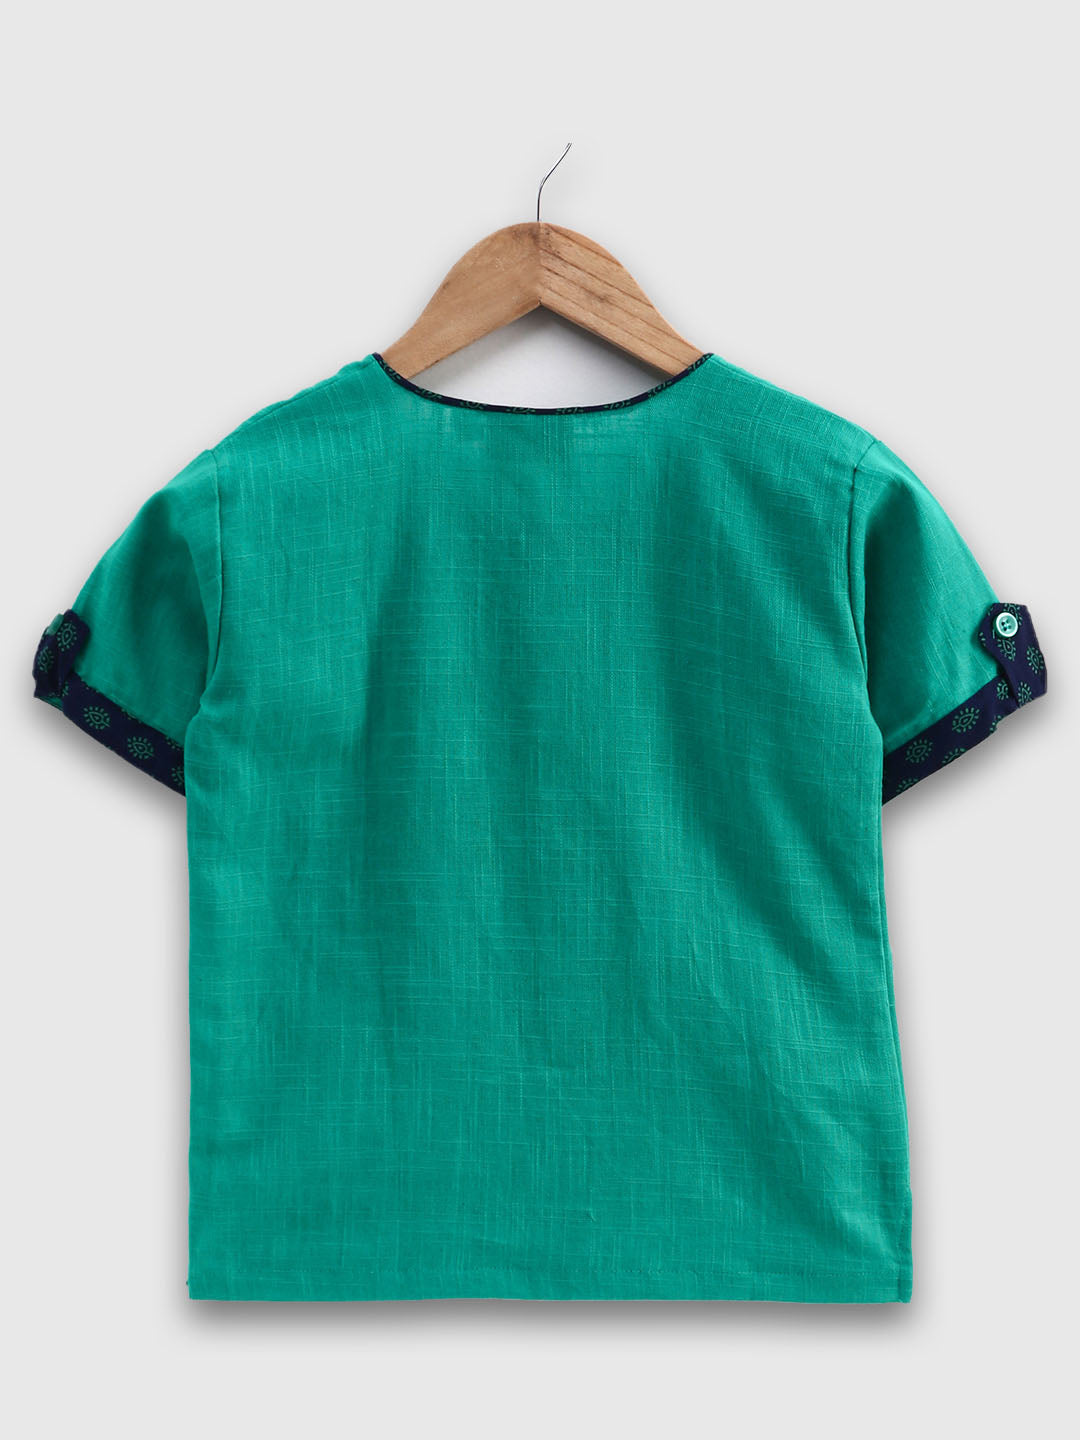 BownBee Cotton Half Sleeve Shirt For Baby Boys- Green